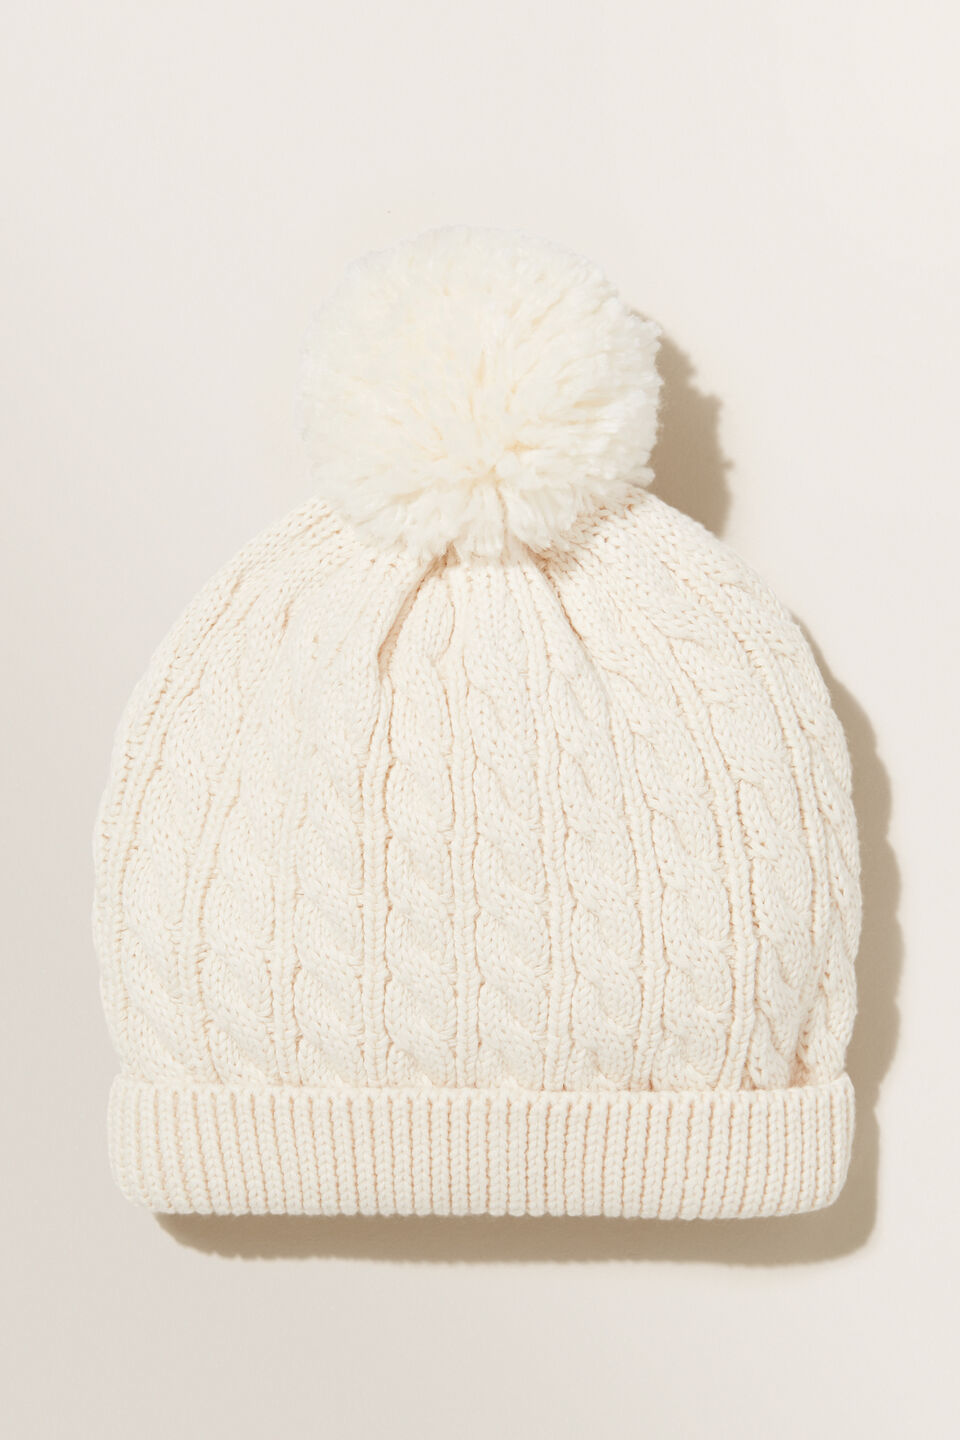 Creme Cable Knit Beanie  Creme